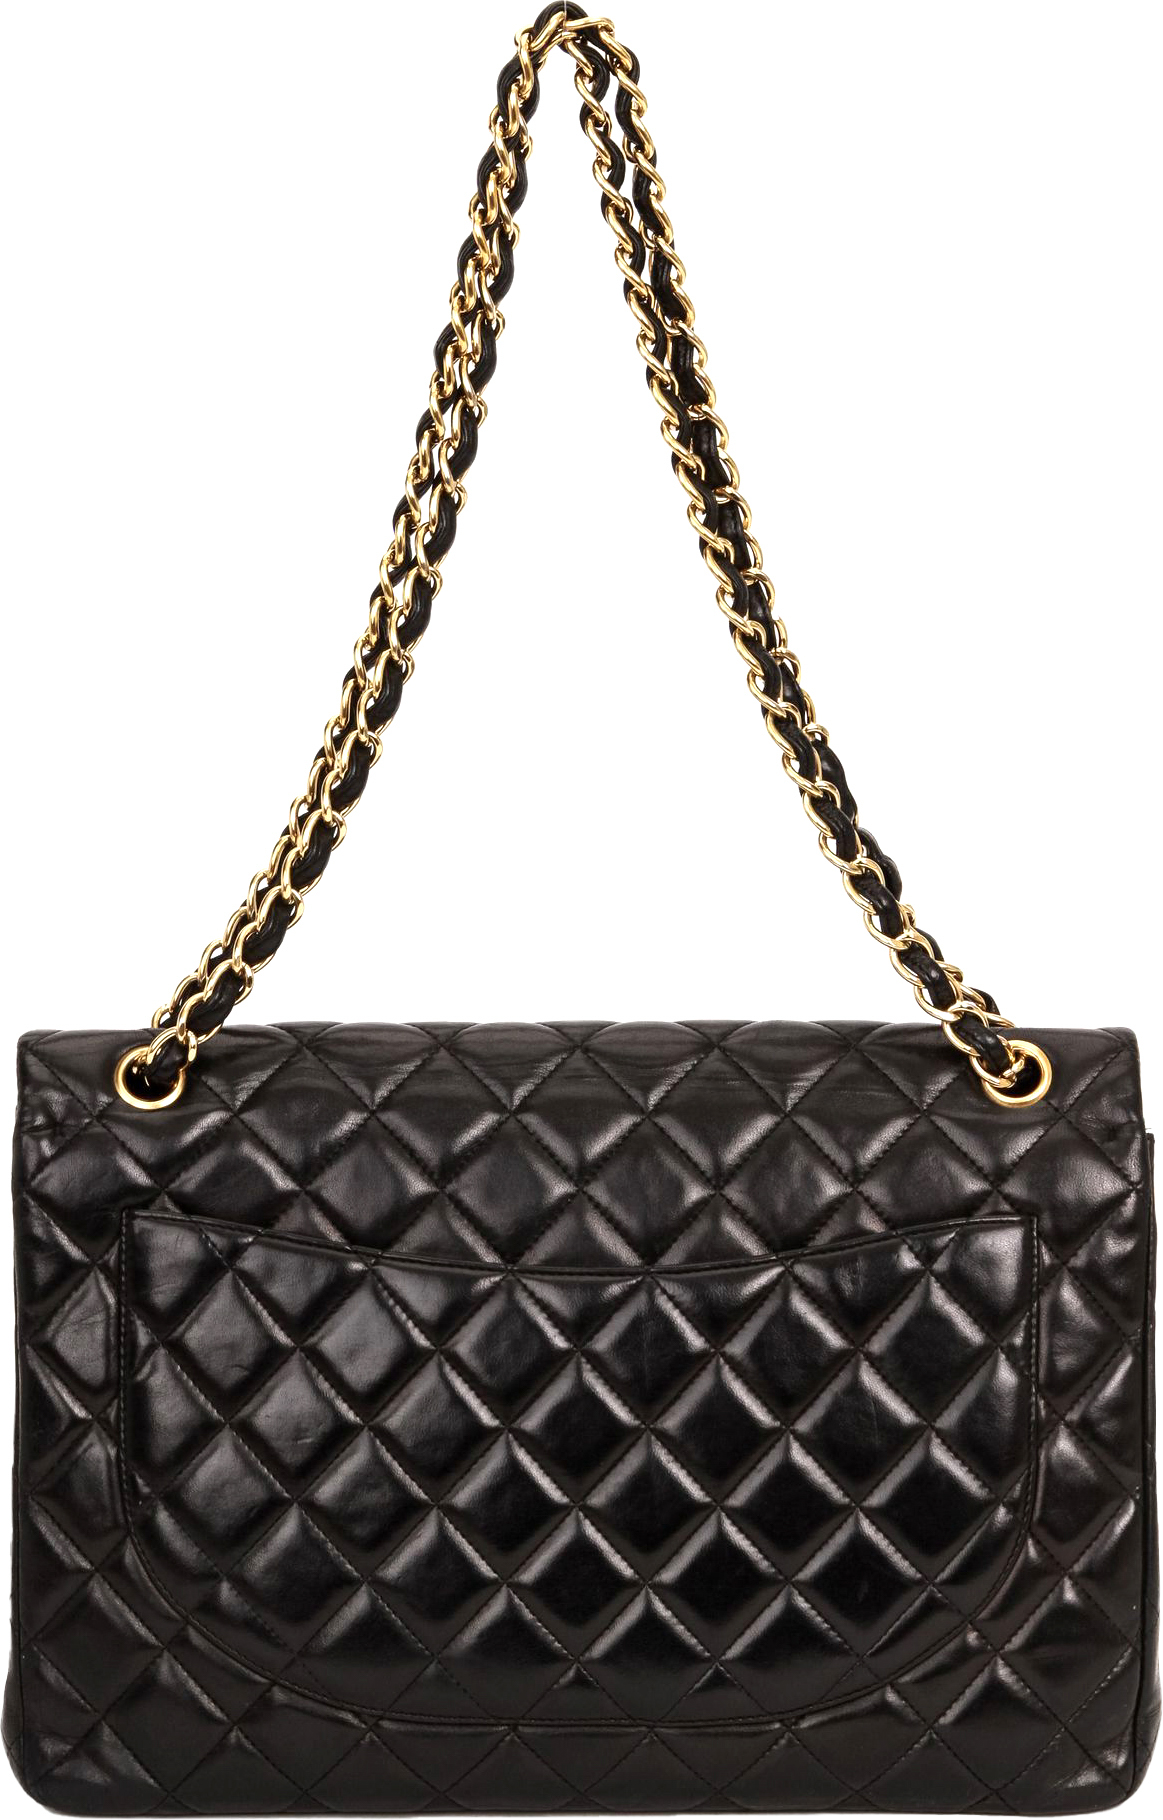 Chanel Black Quilted Patent Leather Maxi Classic Single Flap